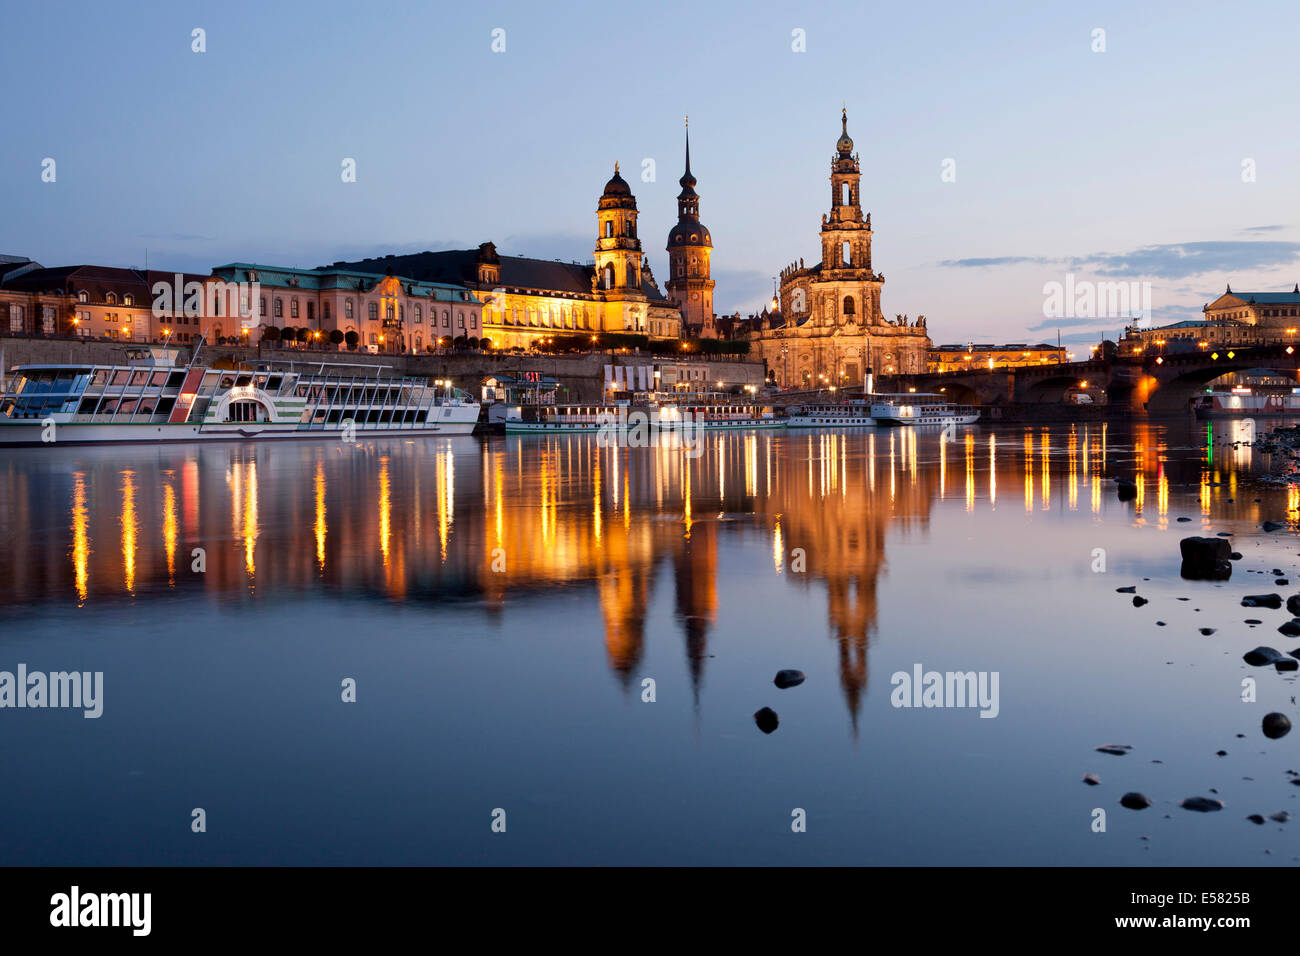 Elbe River, Dresden Cathedral or Katholische Hofkirche Church and Dresden Castle, Dresden, Saxony, Germany Stock Photo